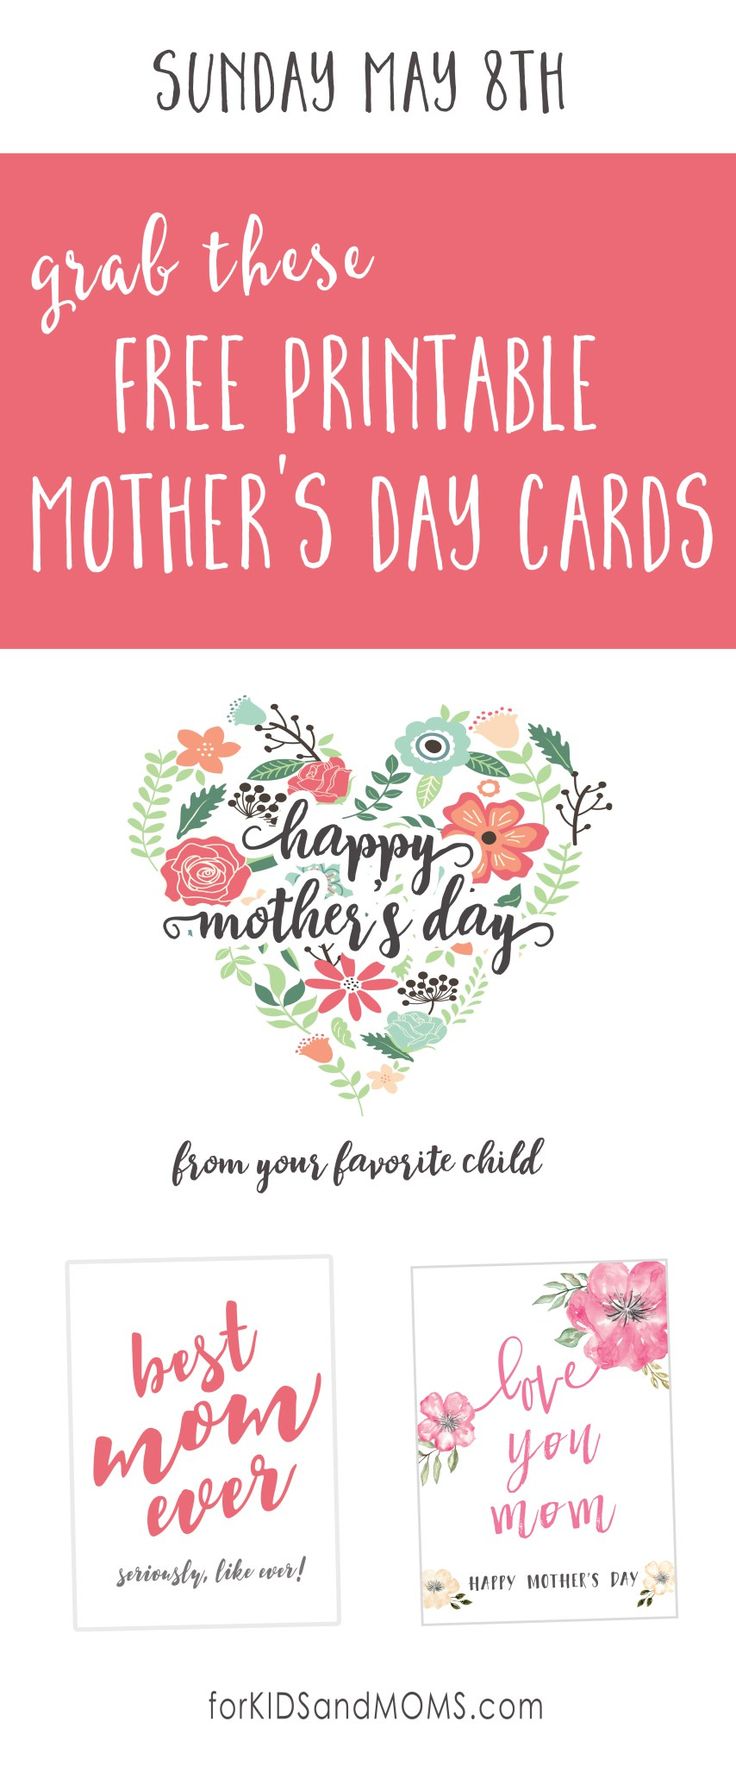 Mothers Day Messages and Free Printable Mothers Day Cards For Kids and Moms